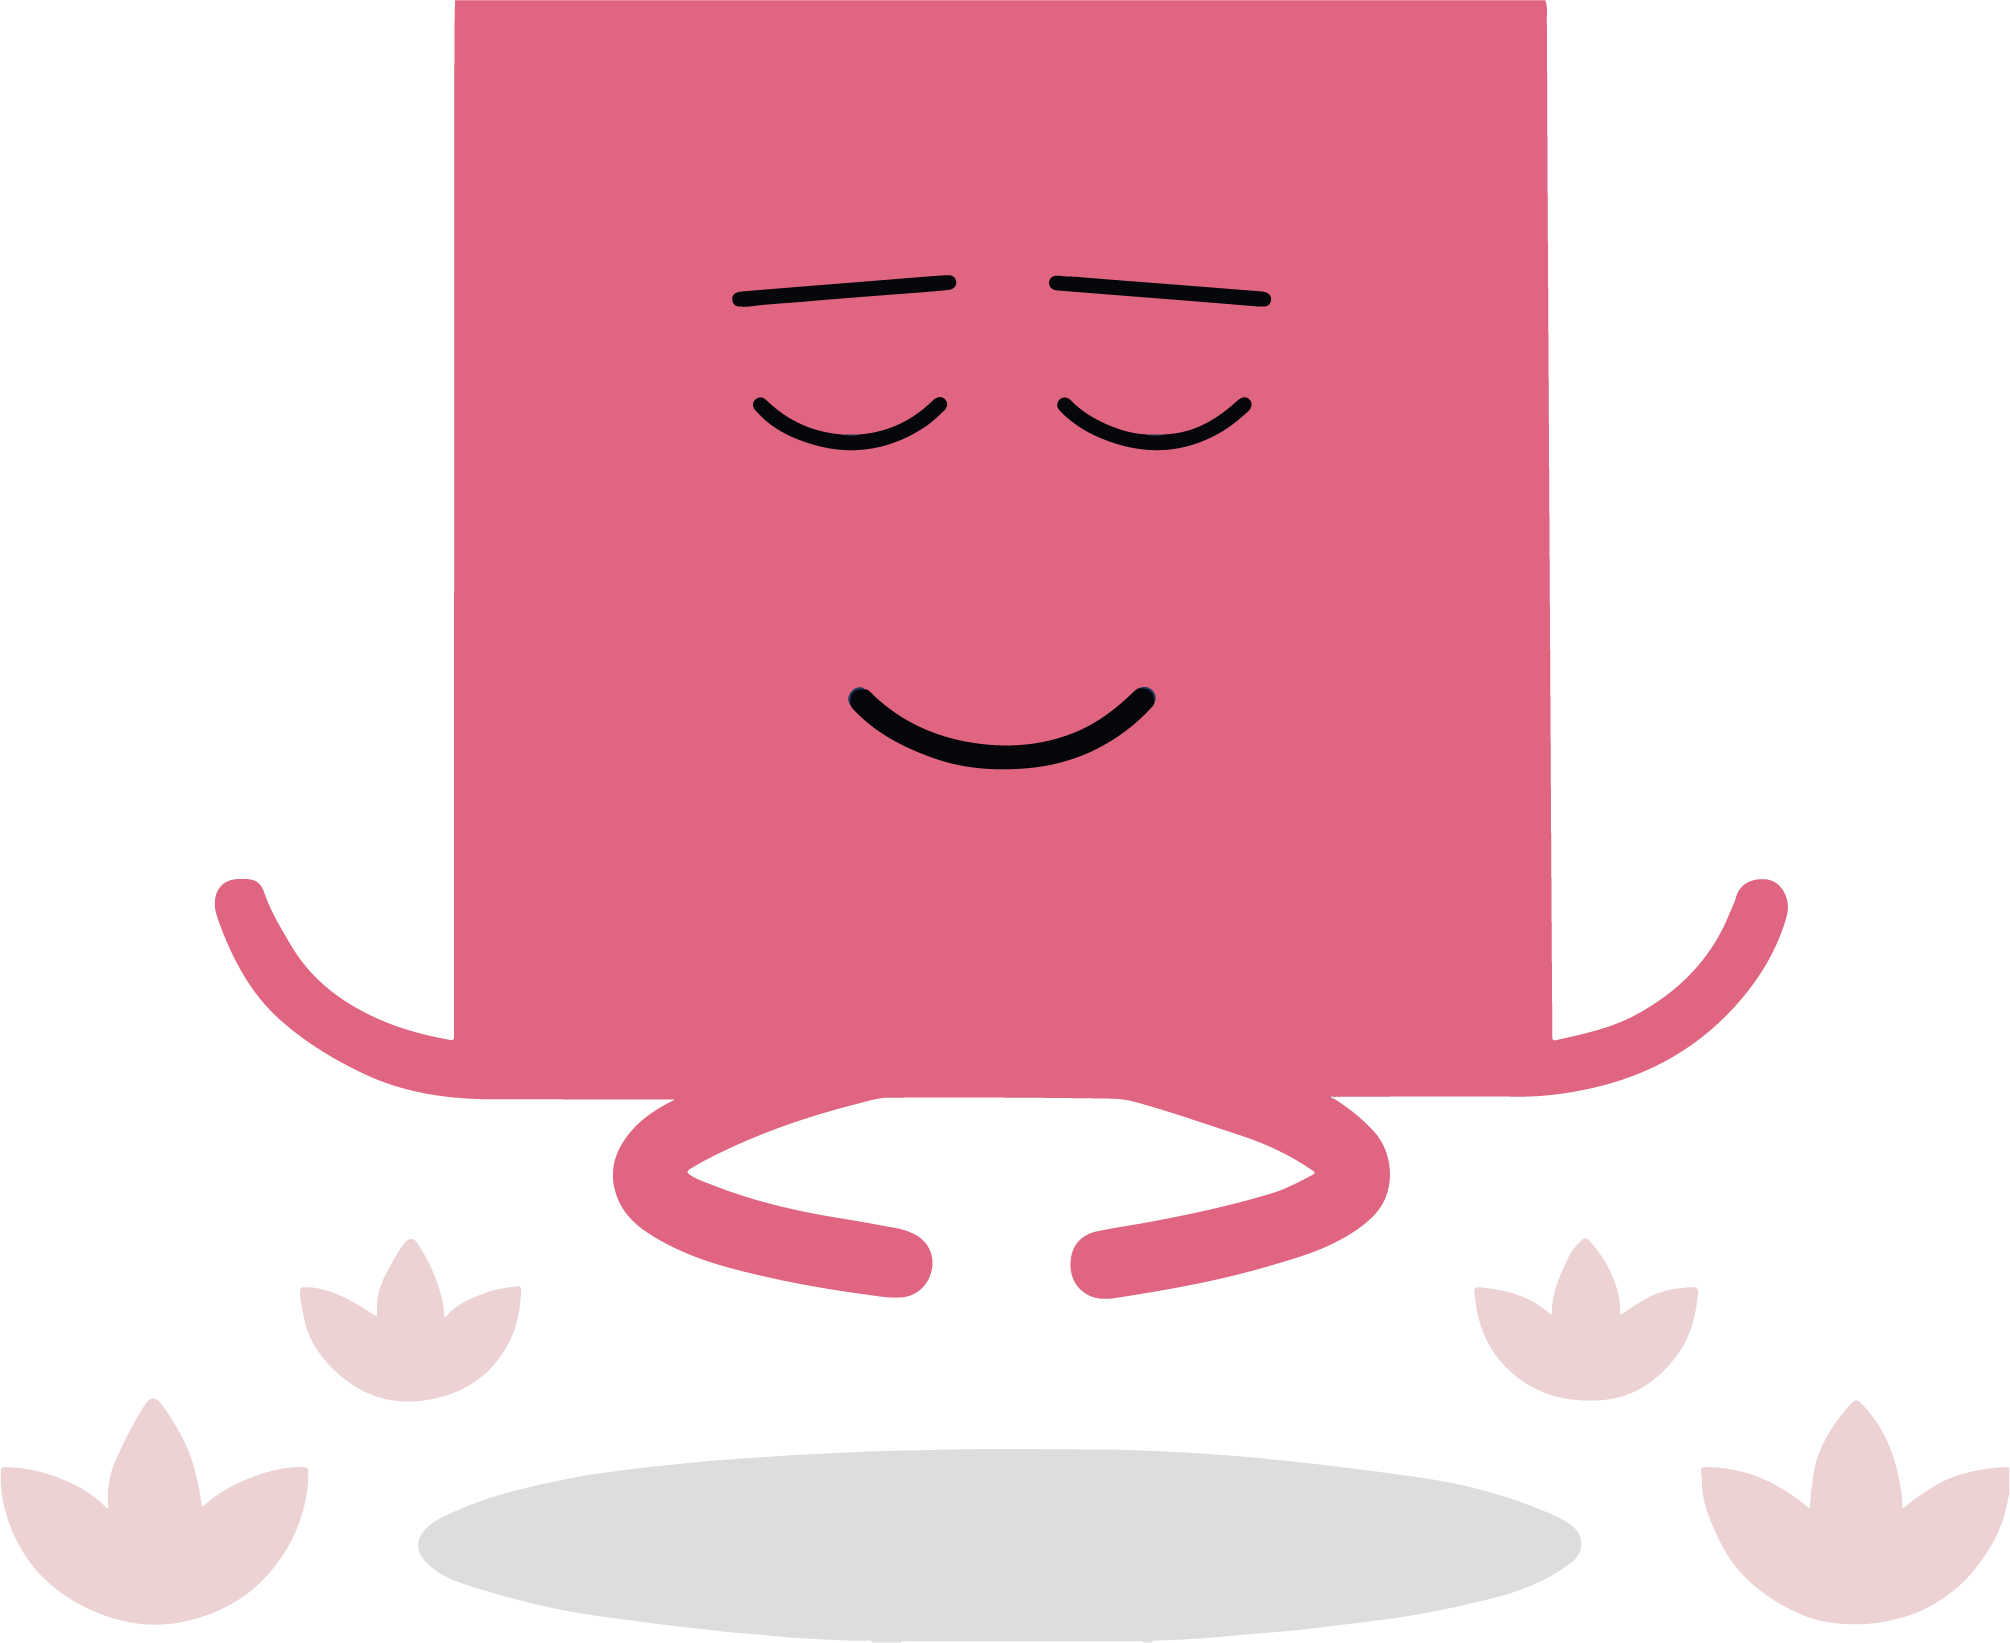 2018 Will Be The Year To Place Workplace Wellbeing - Smiley (2010x1643)